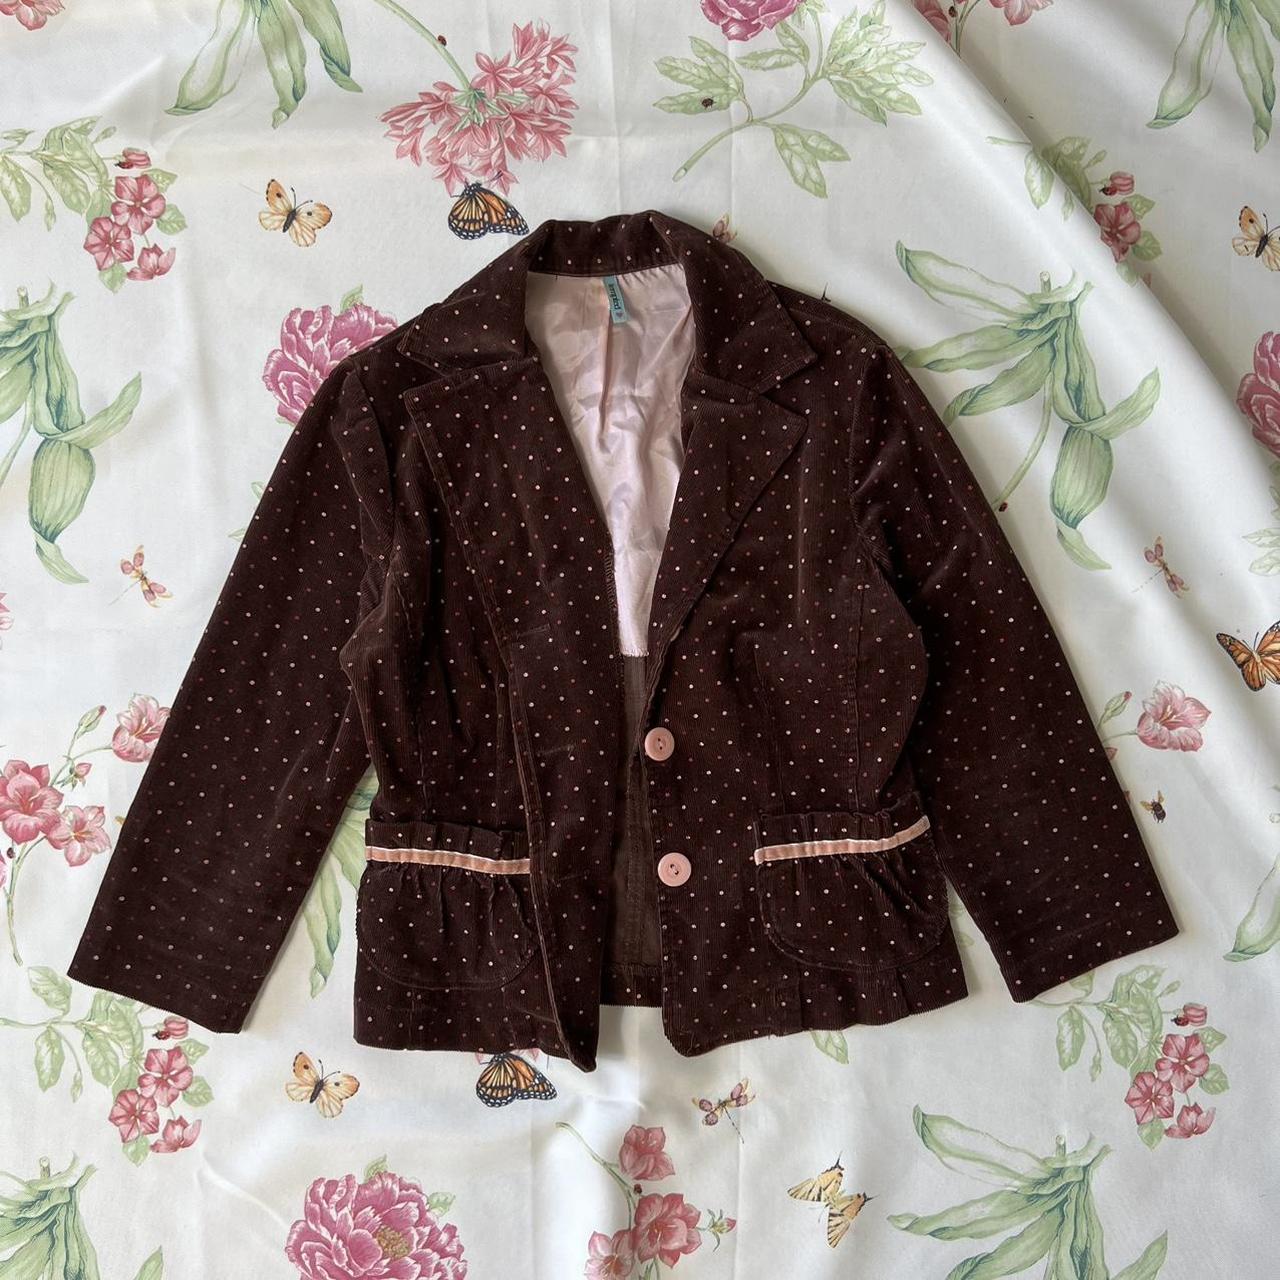 B.Tempt'd Women's Burgundy and Pink Jacket